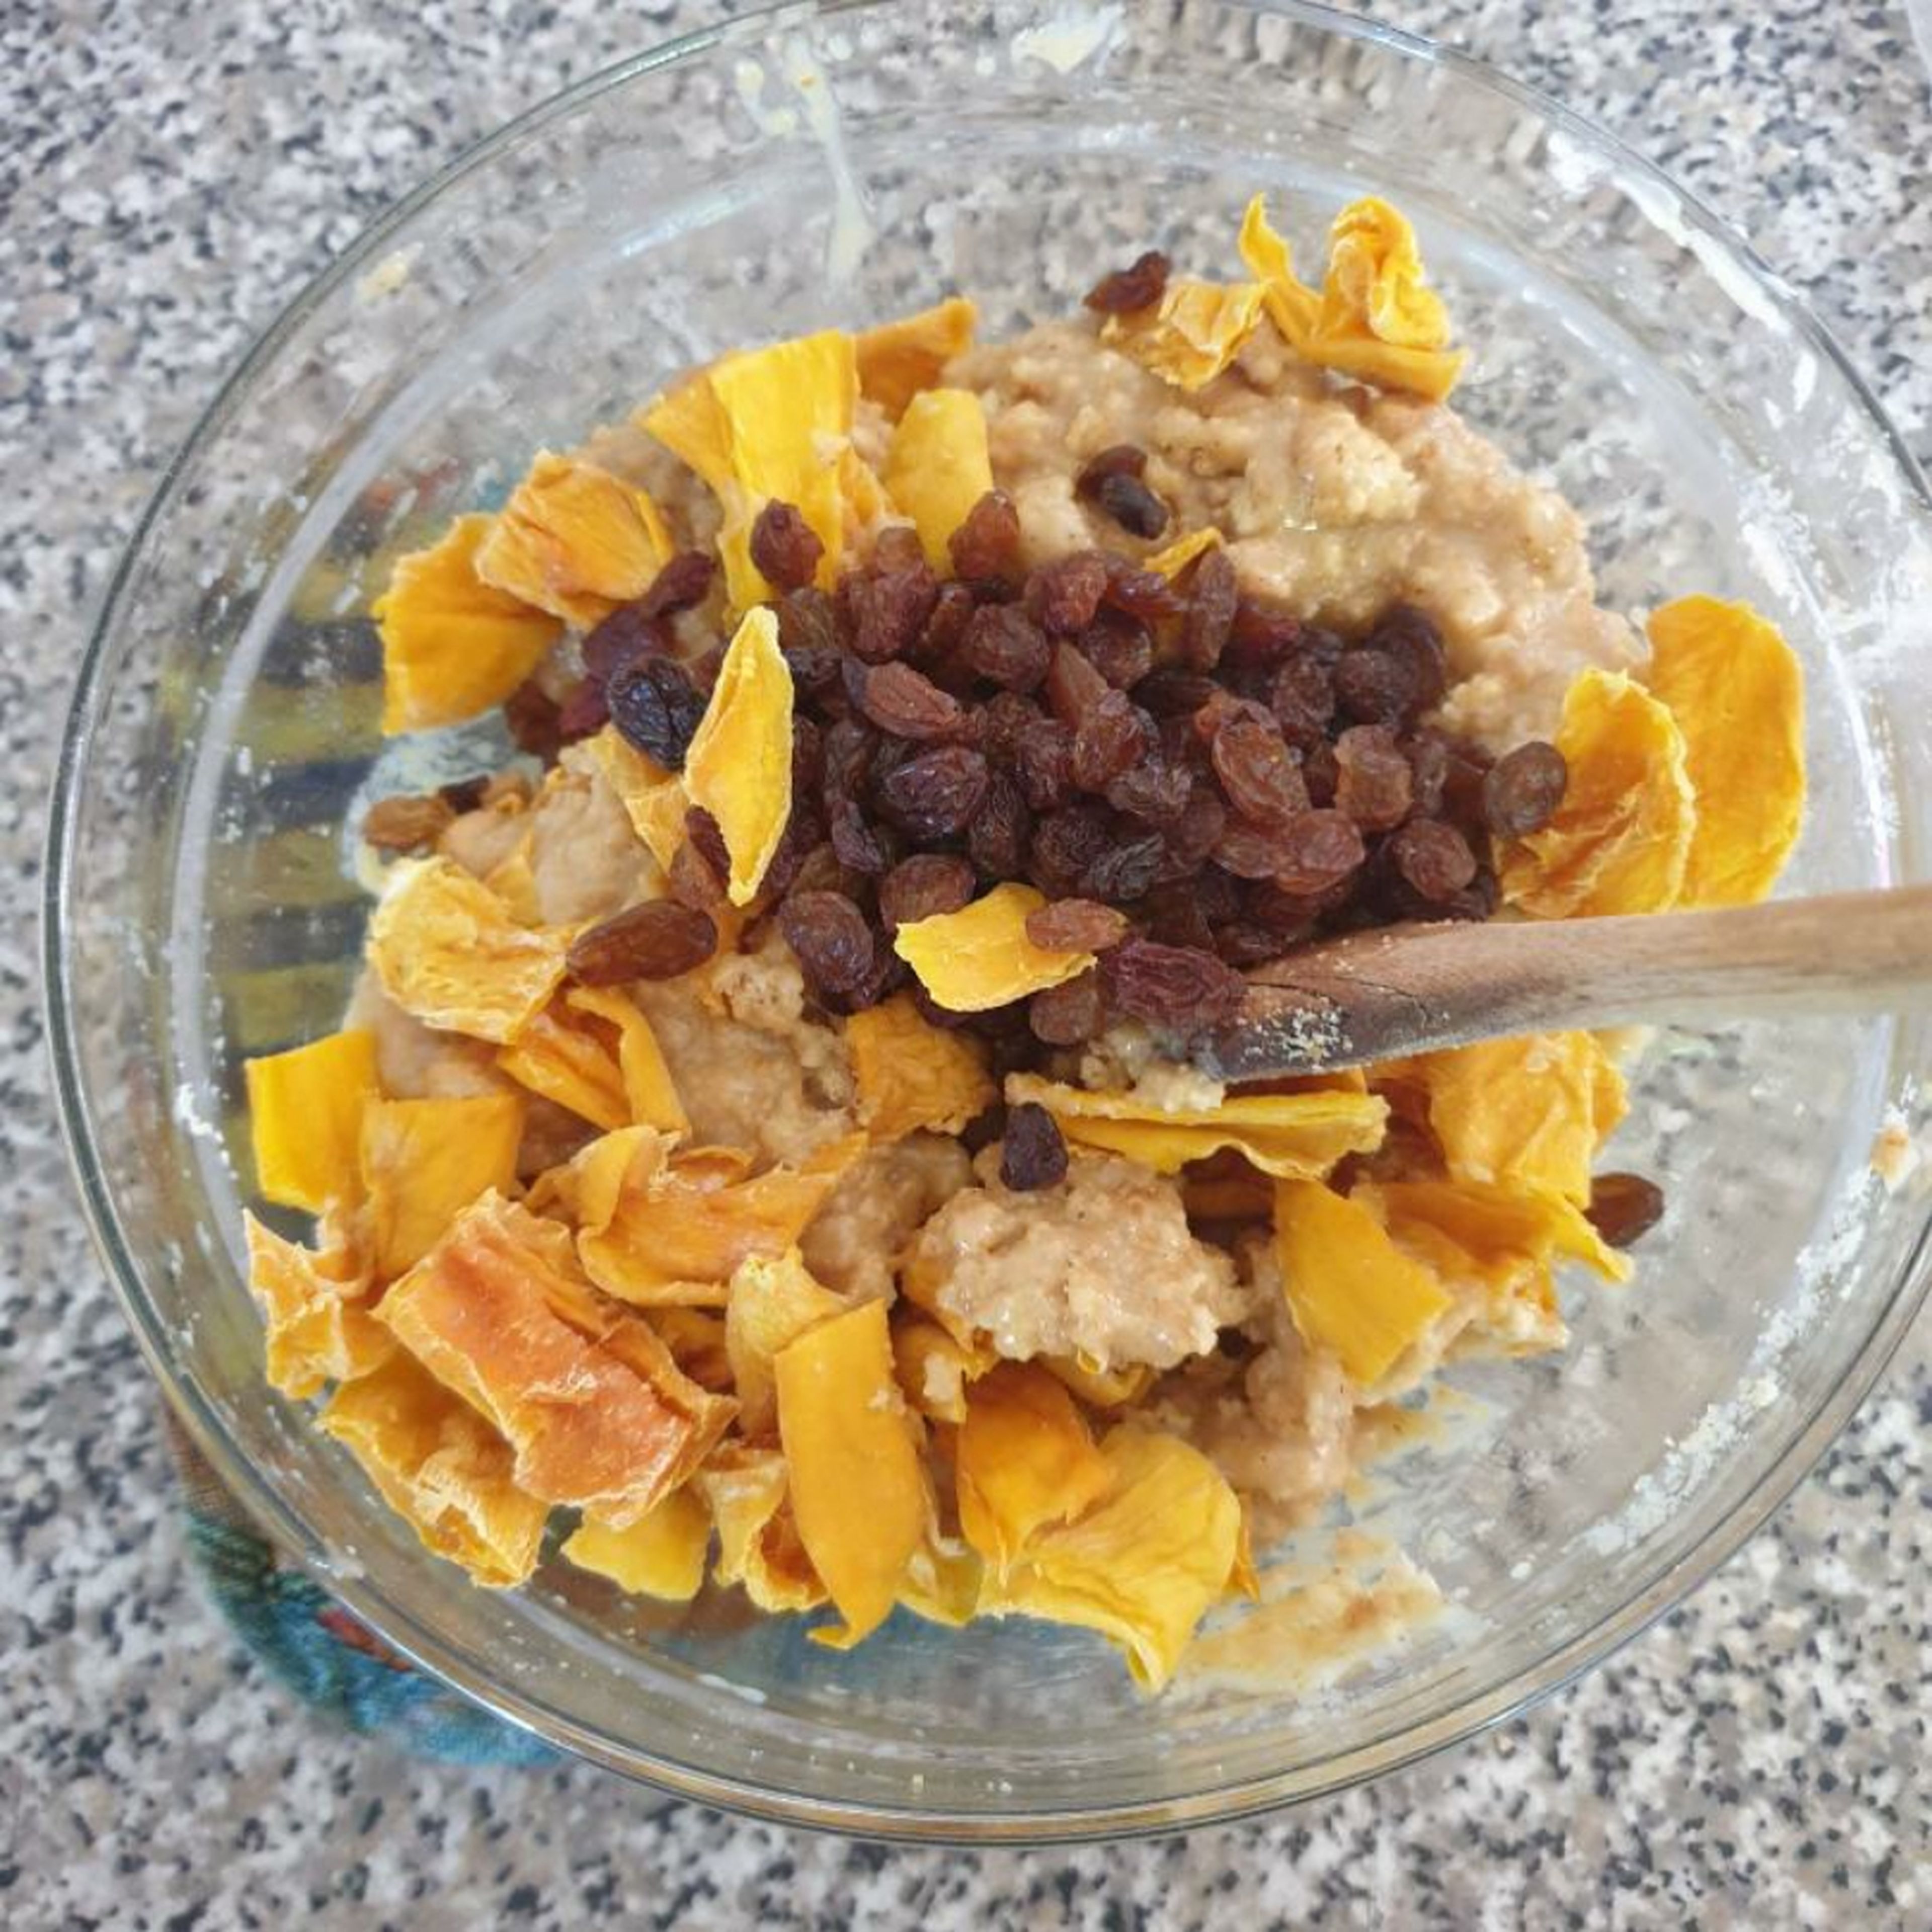 Add the mangoes and raisins and mix to combine; ensuring all the ingredients are combined with the chocolate mixture.